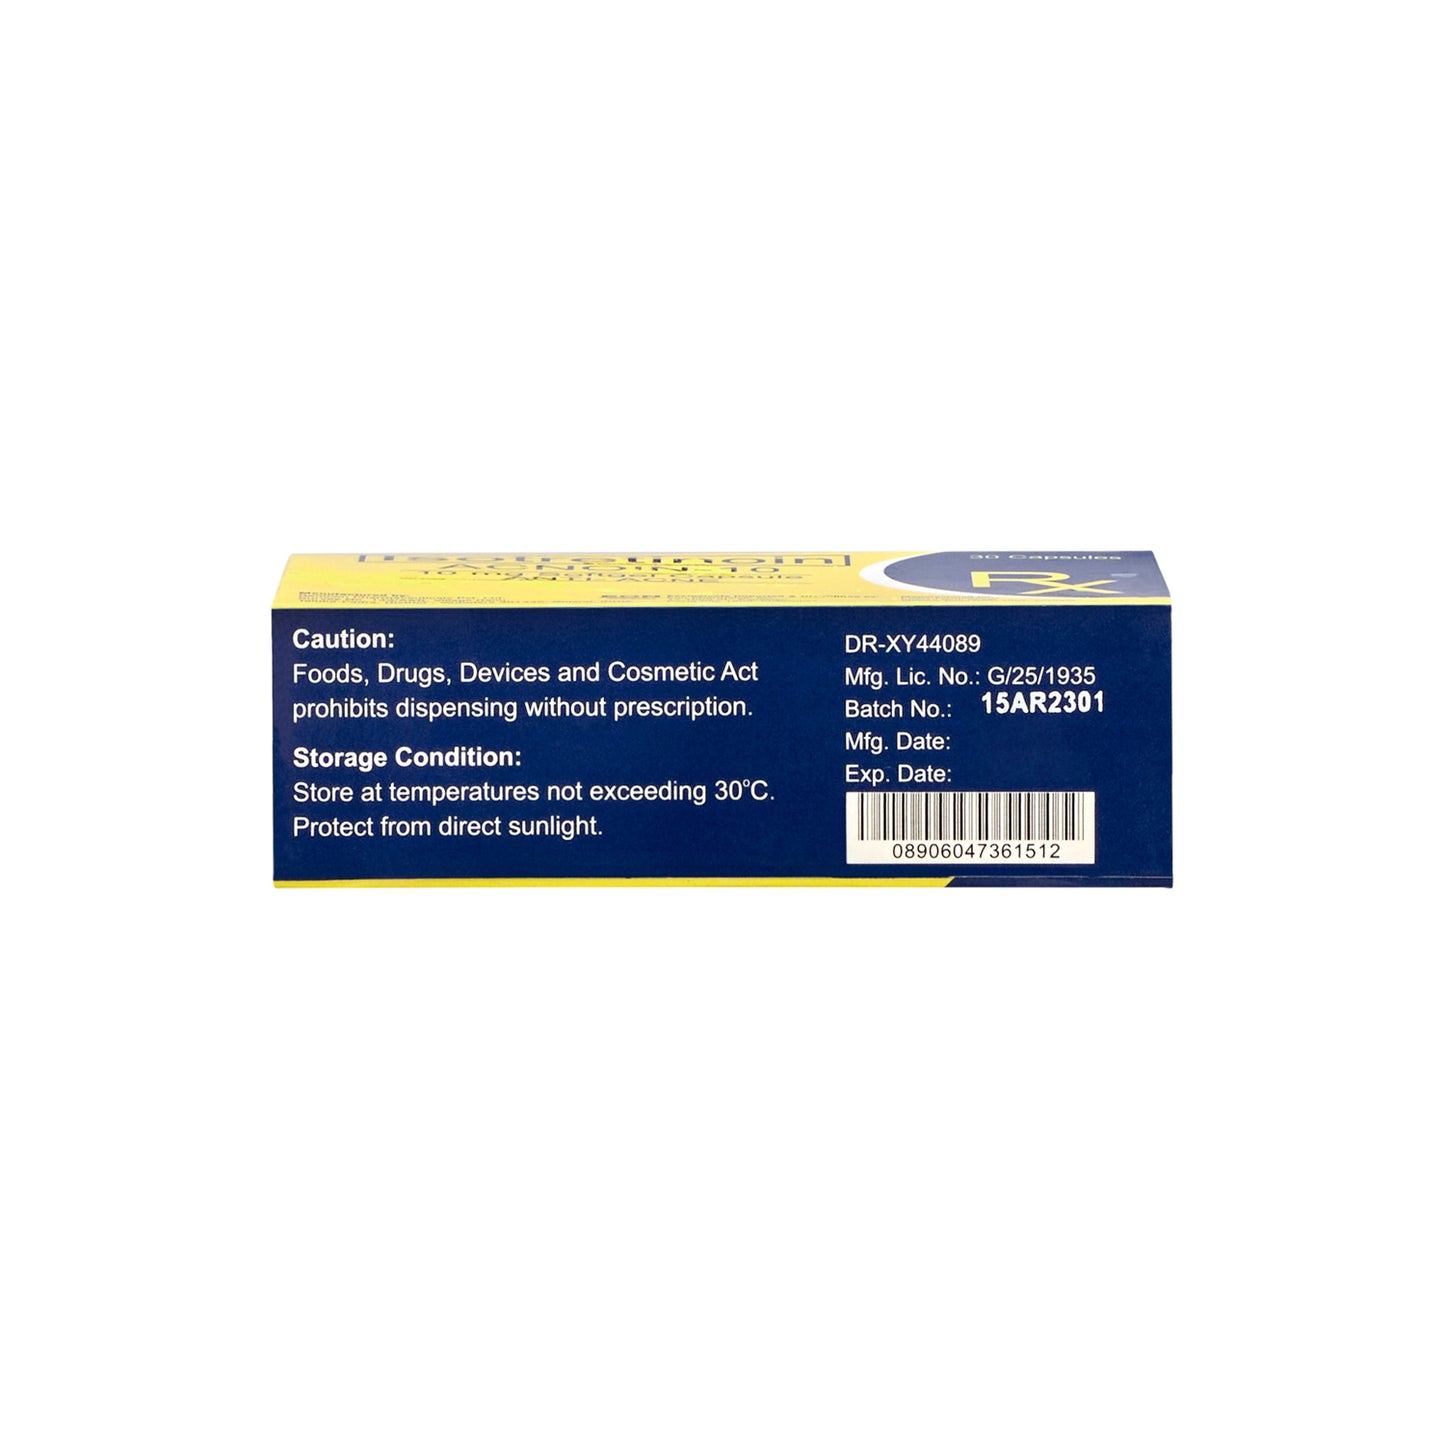 [Rx] ACNOIN Isotretinoin 10mg (Box of 30s) | DMD Patient-Exclusive